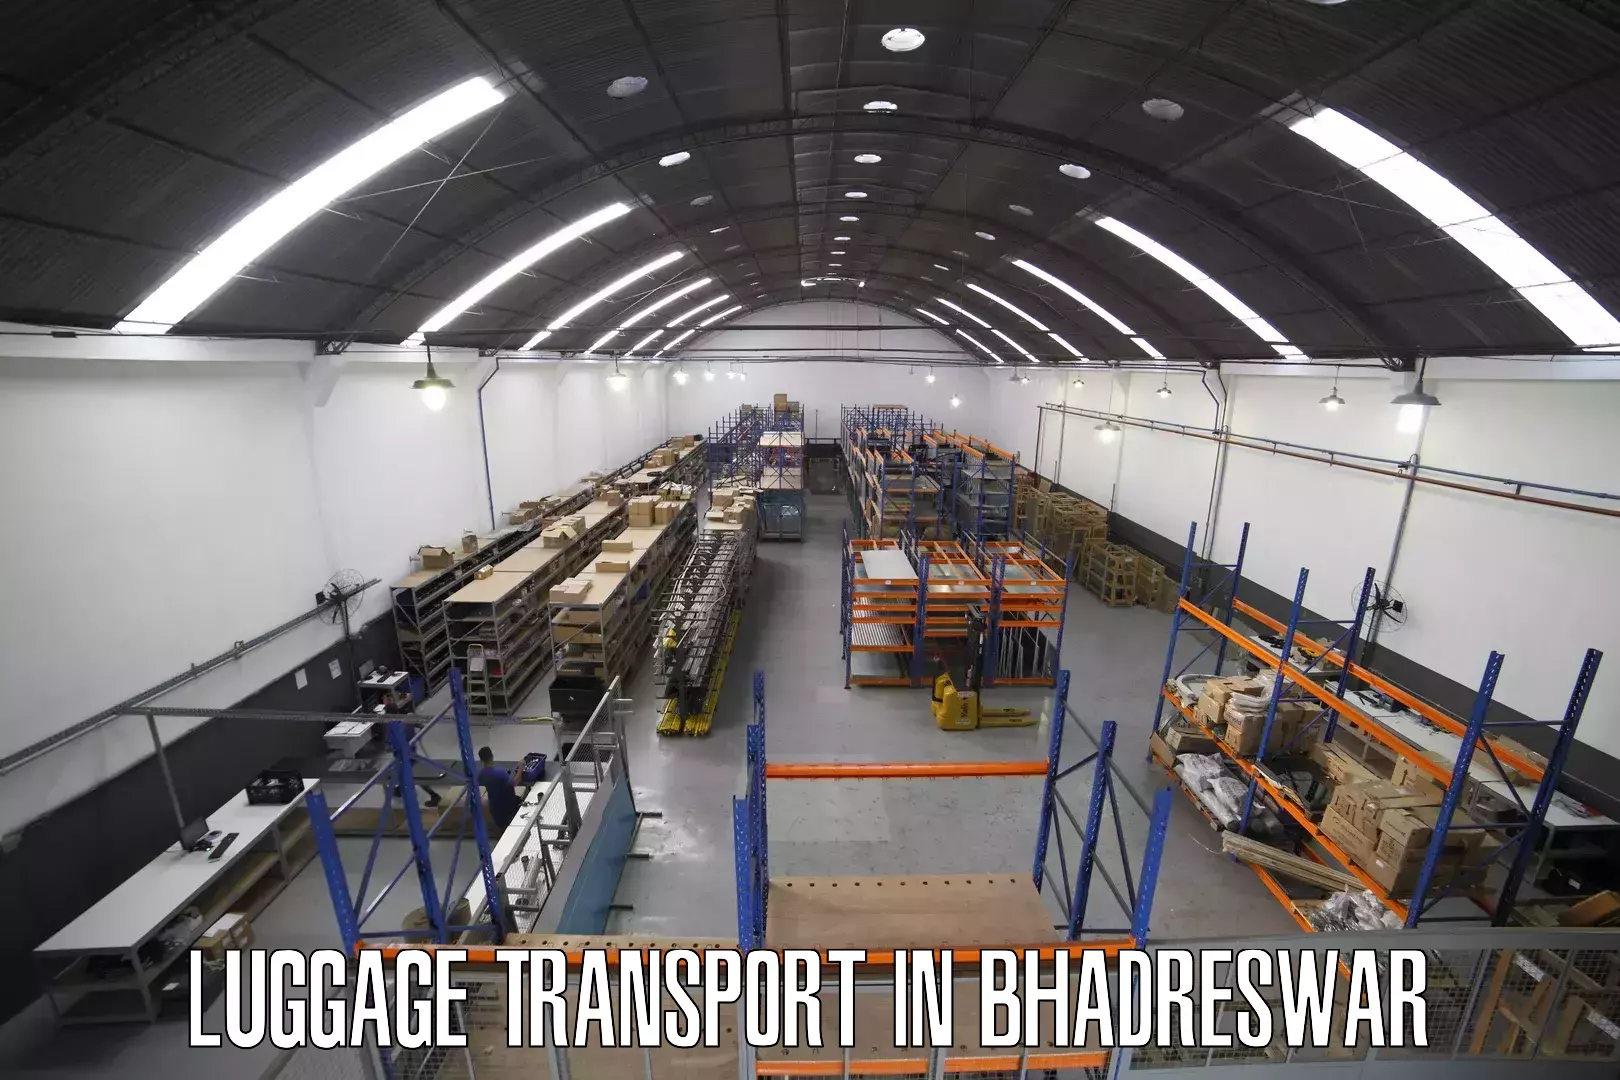 Baggage transport technology in Bhadreswar